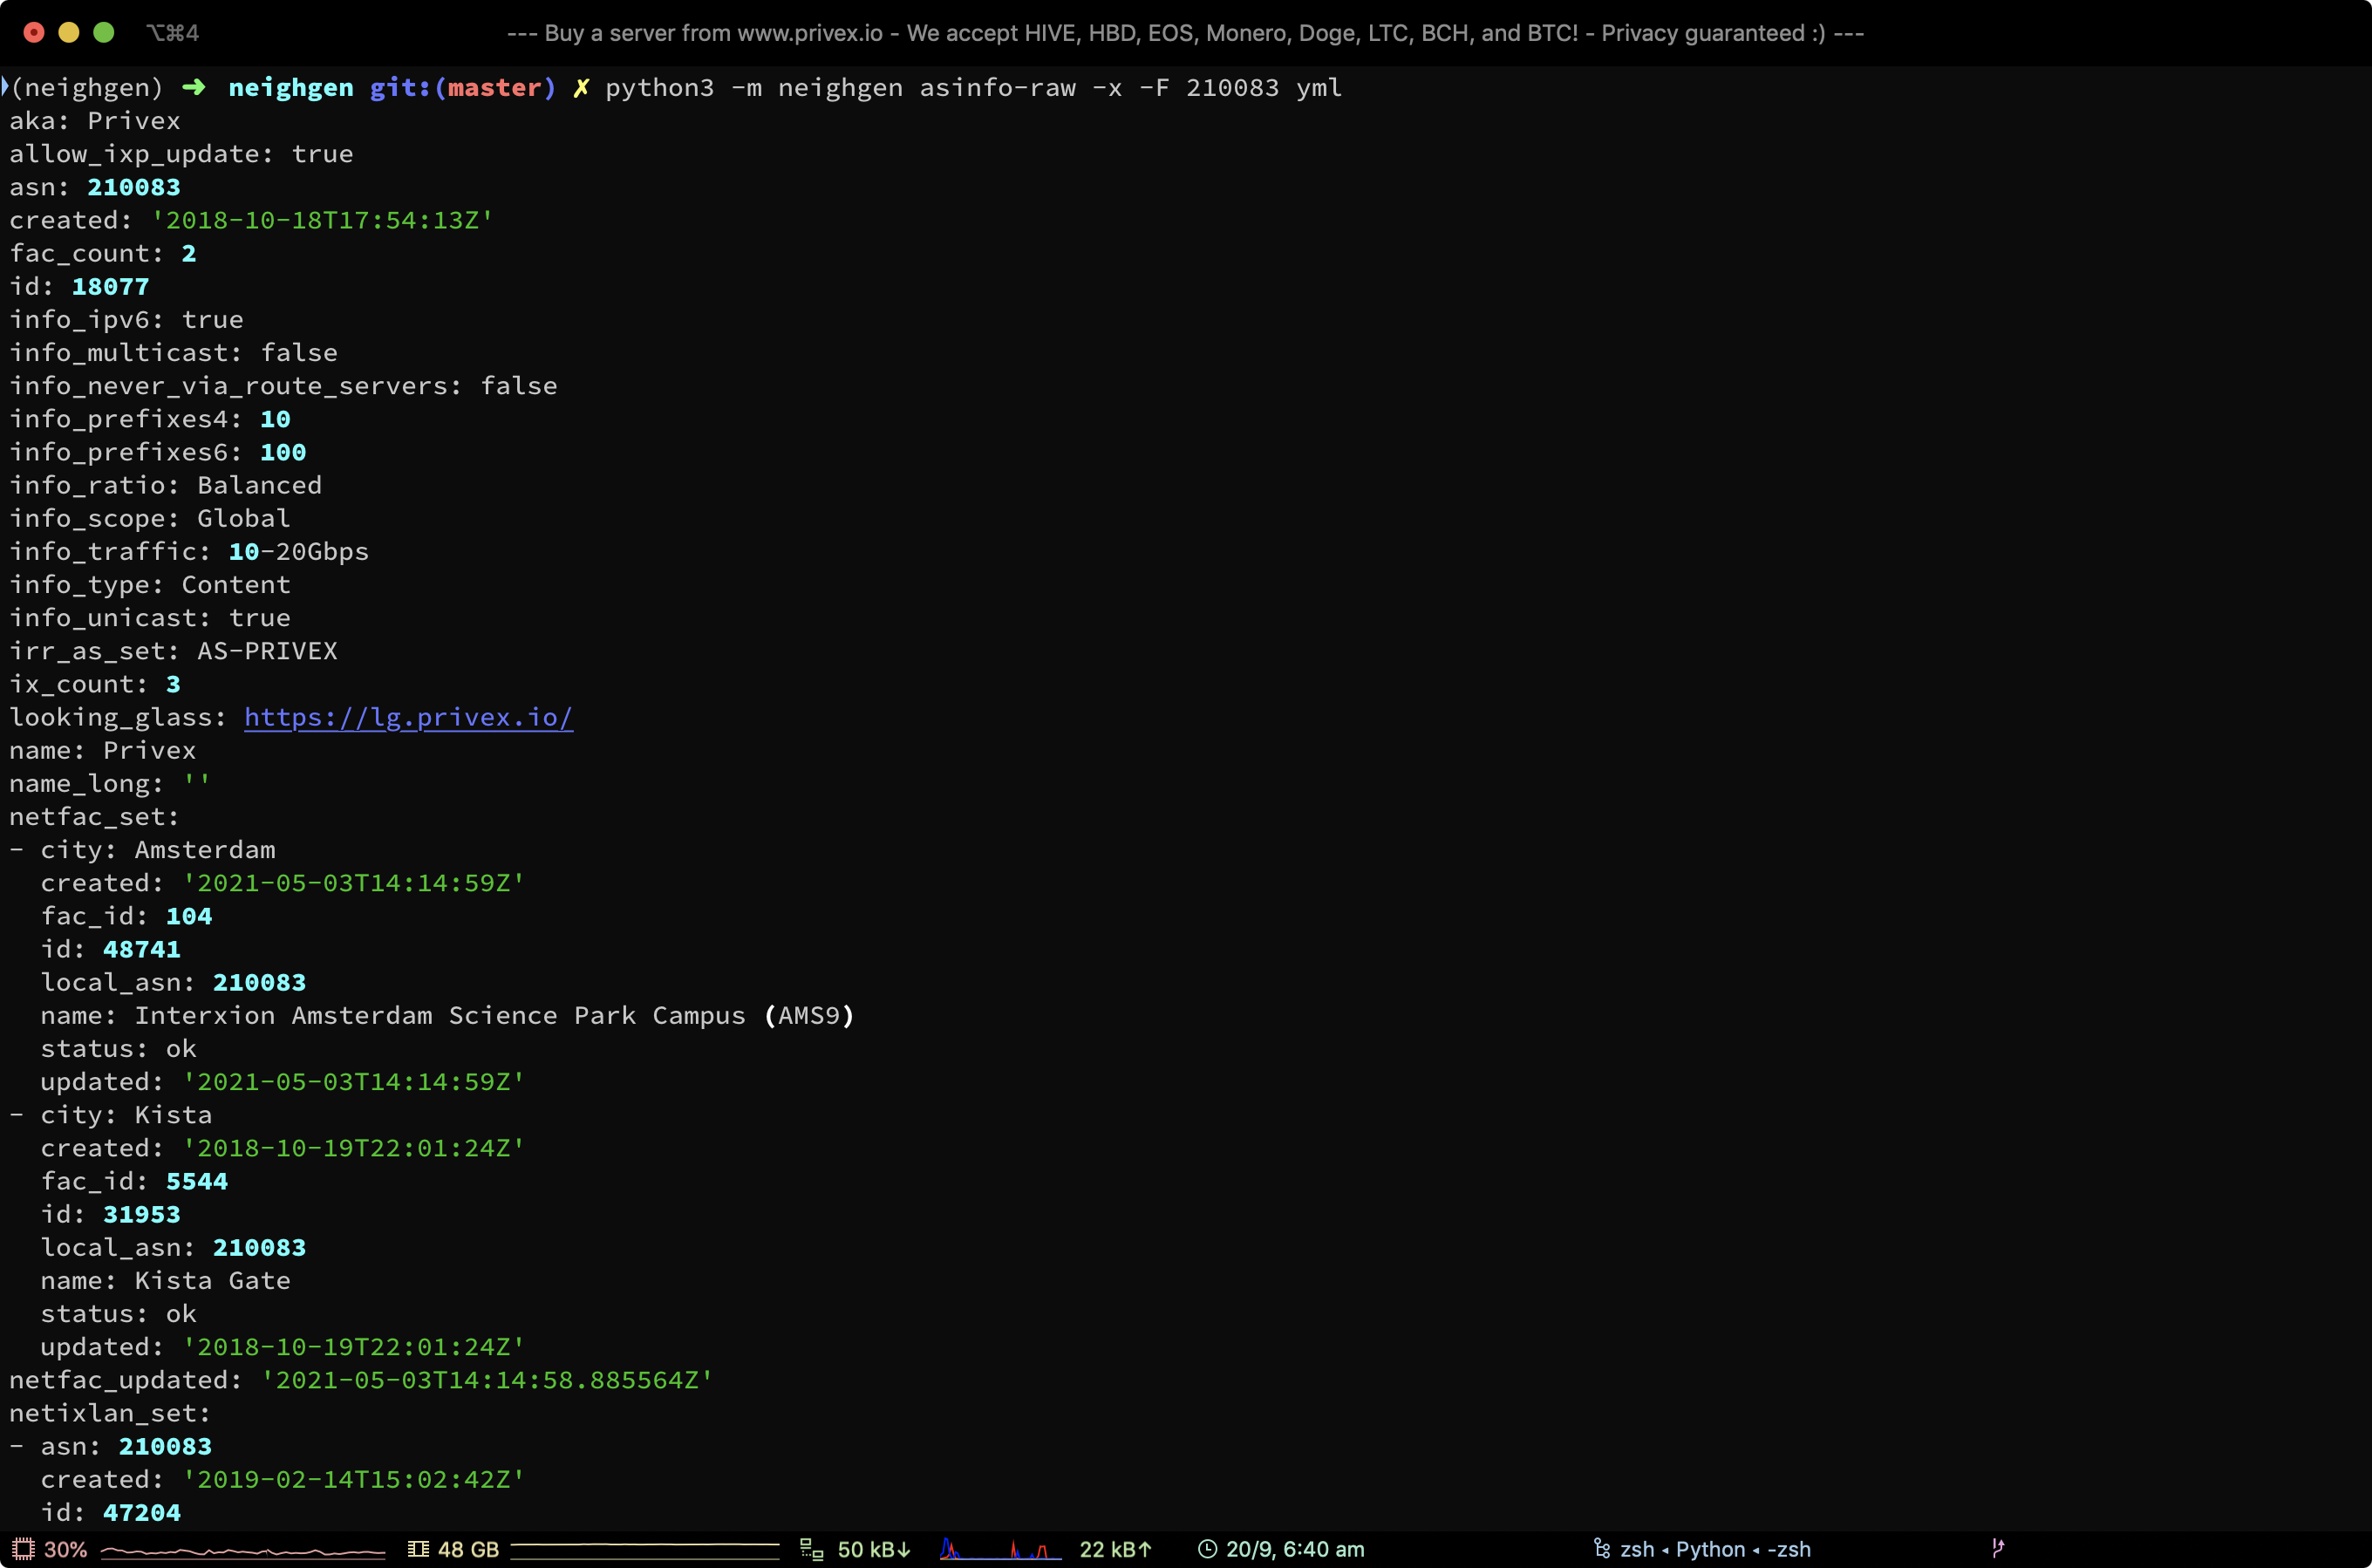 Screenshot of ASINFO-RAW command in YML output mode